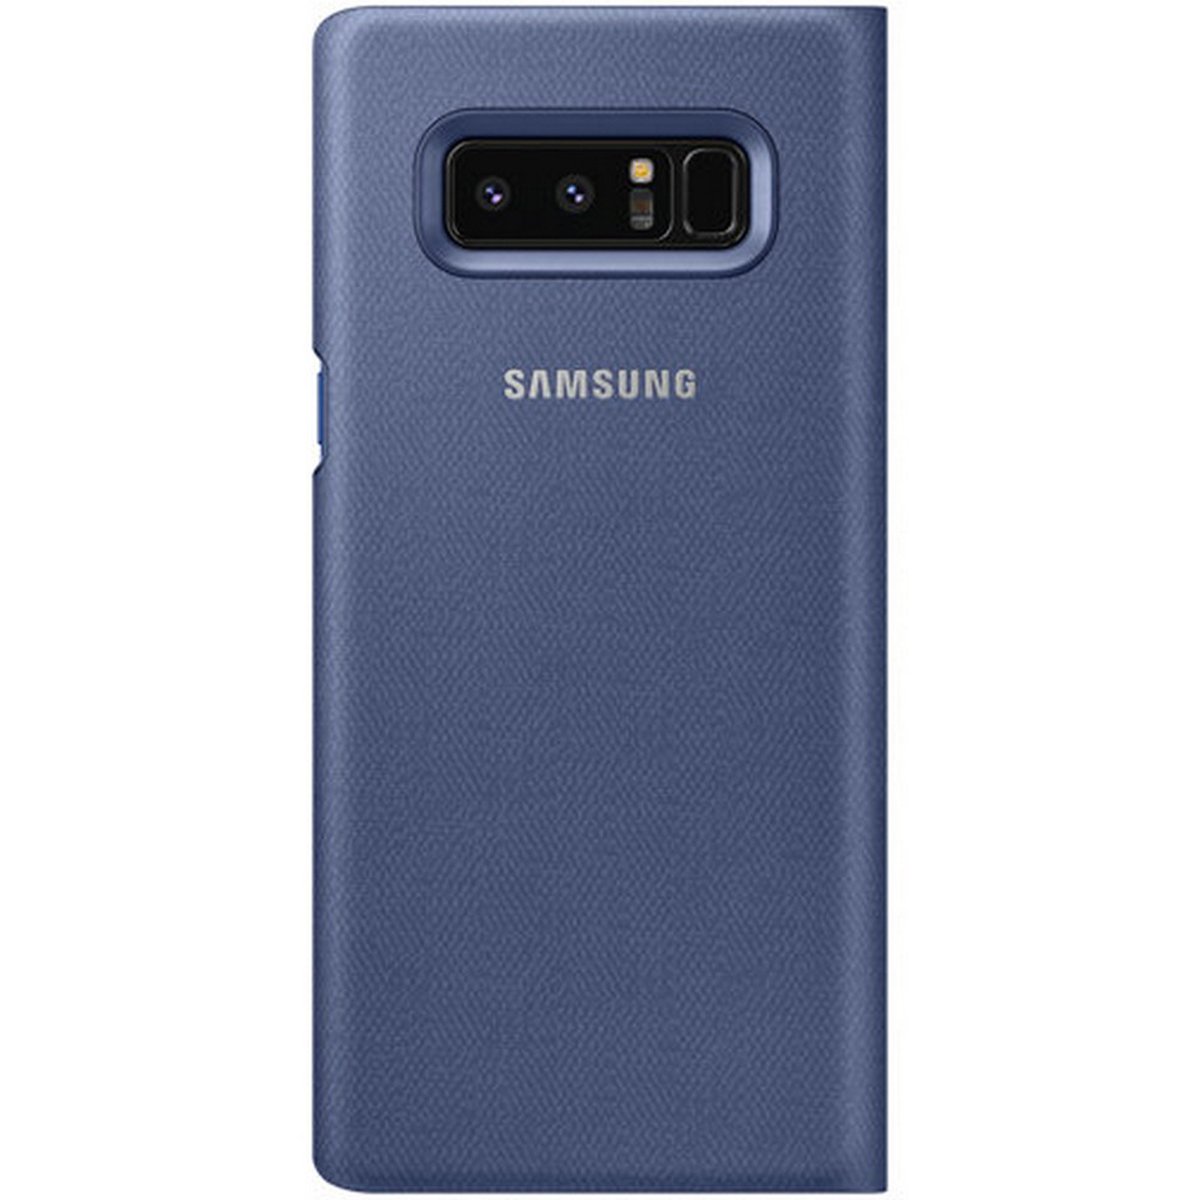 Galaxy Note8 LED View Cover NN950 Blue